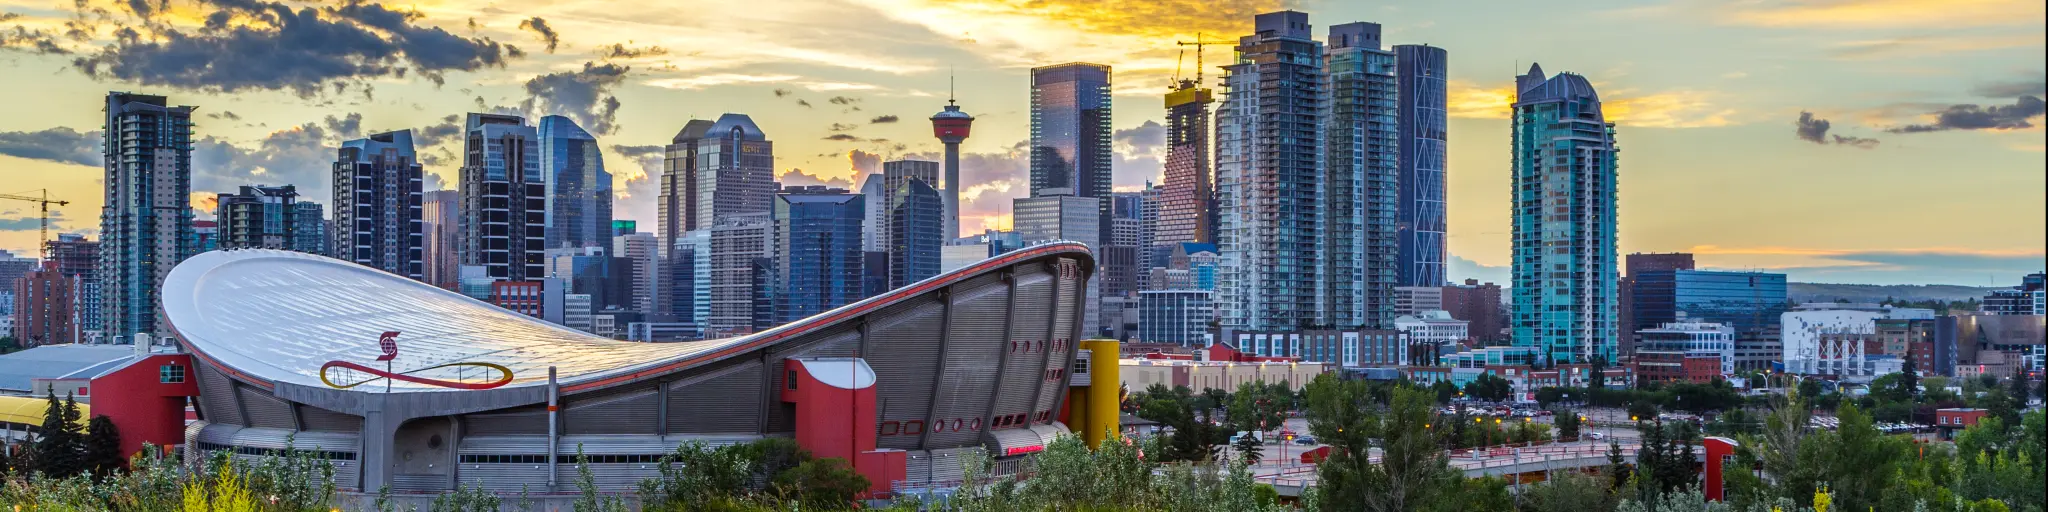 Sunset view of downtown Calgary.